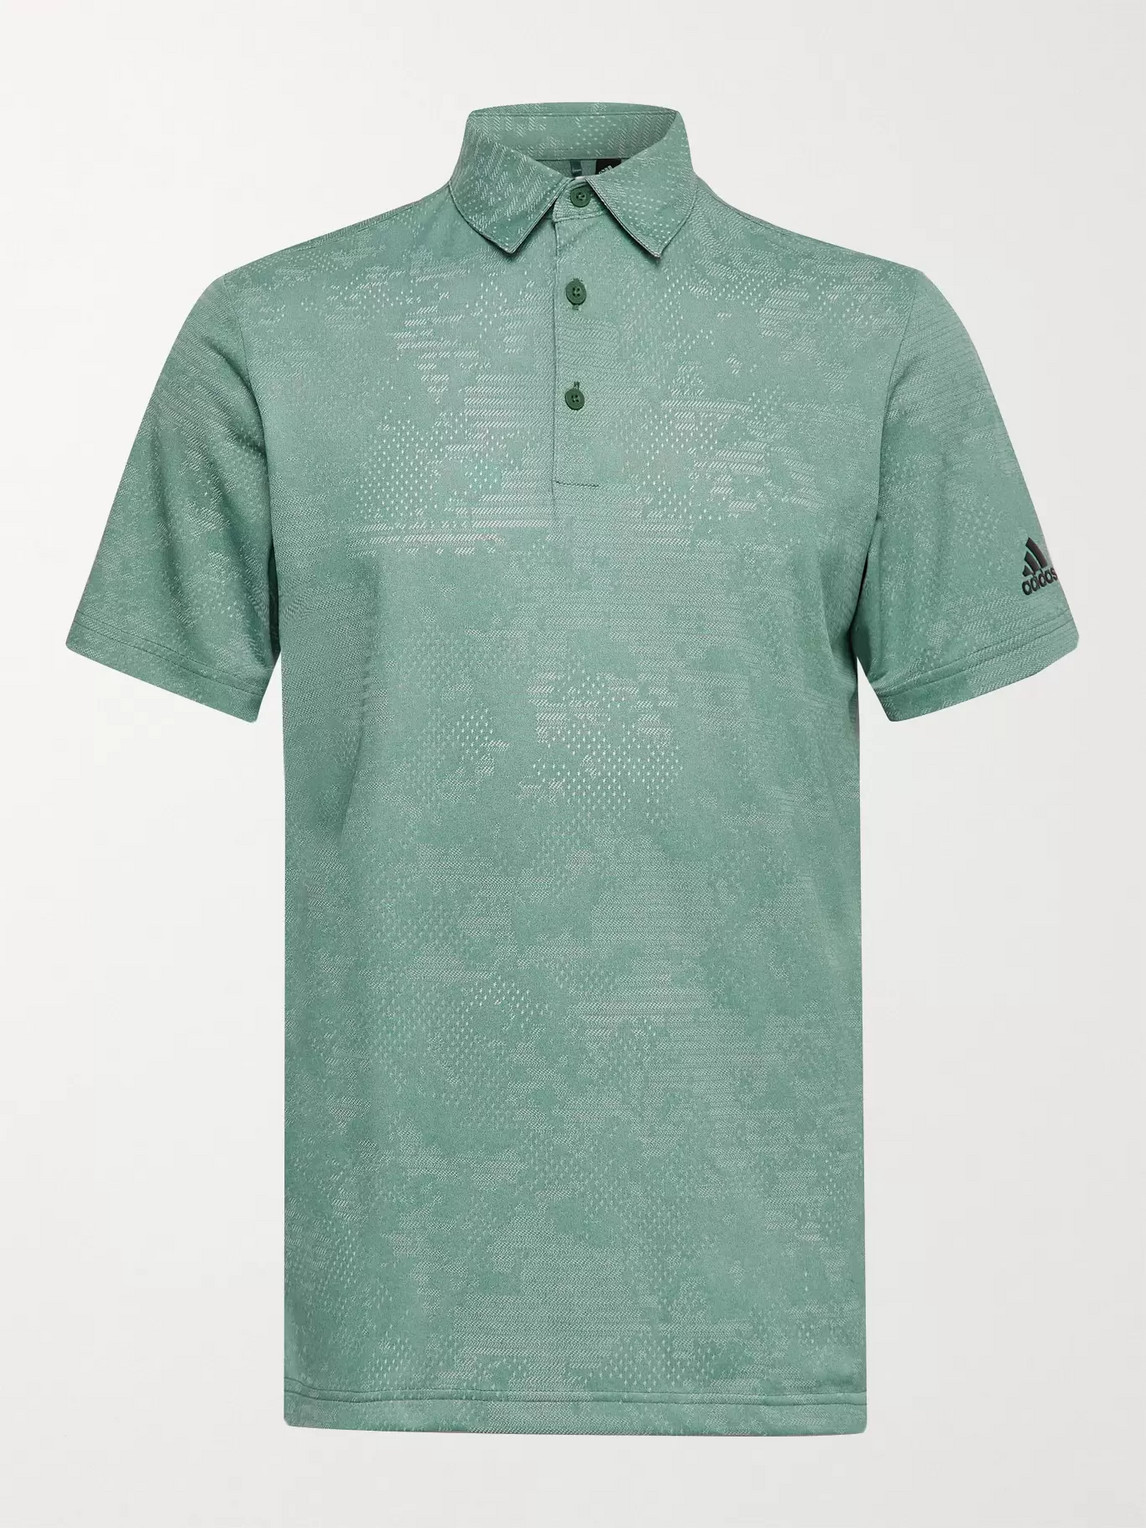 Adidas Golf Mélange Recycled Primegreen Golf Polo Shirt In Green